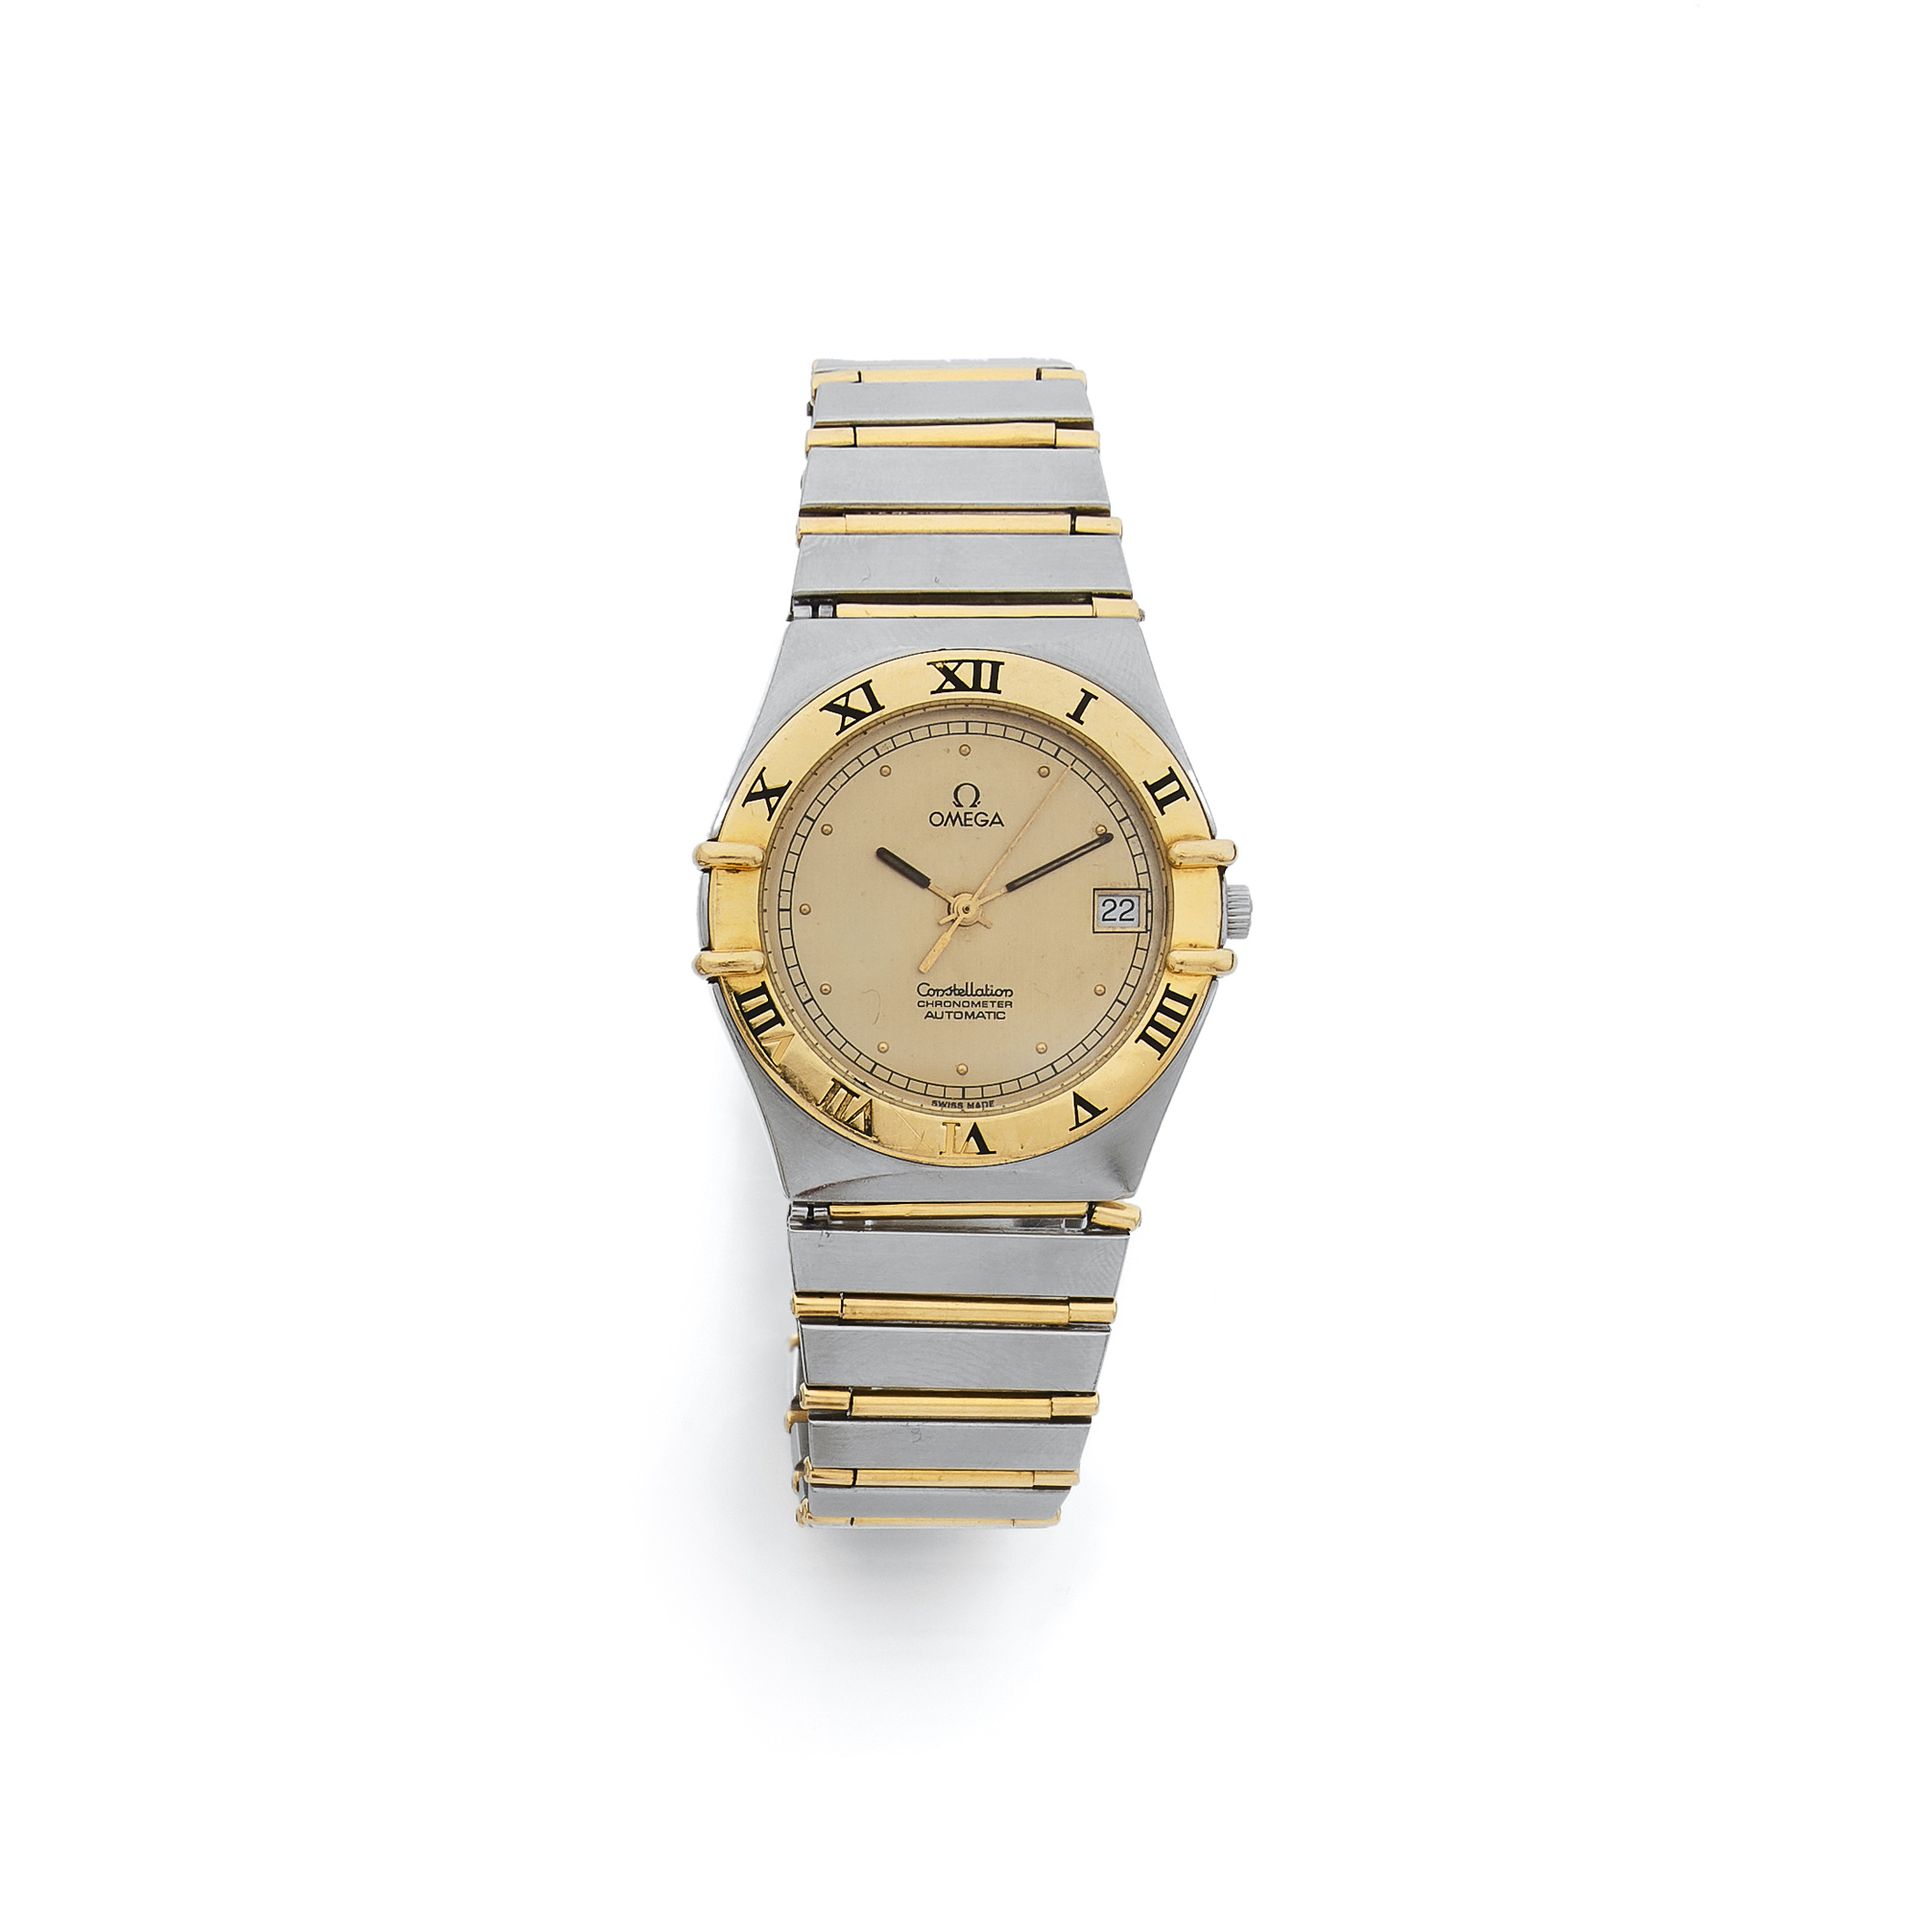 OMEGA, Constellation, vers 2000 Gold and steel watch, graduated bezel with Roman&hellip;